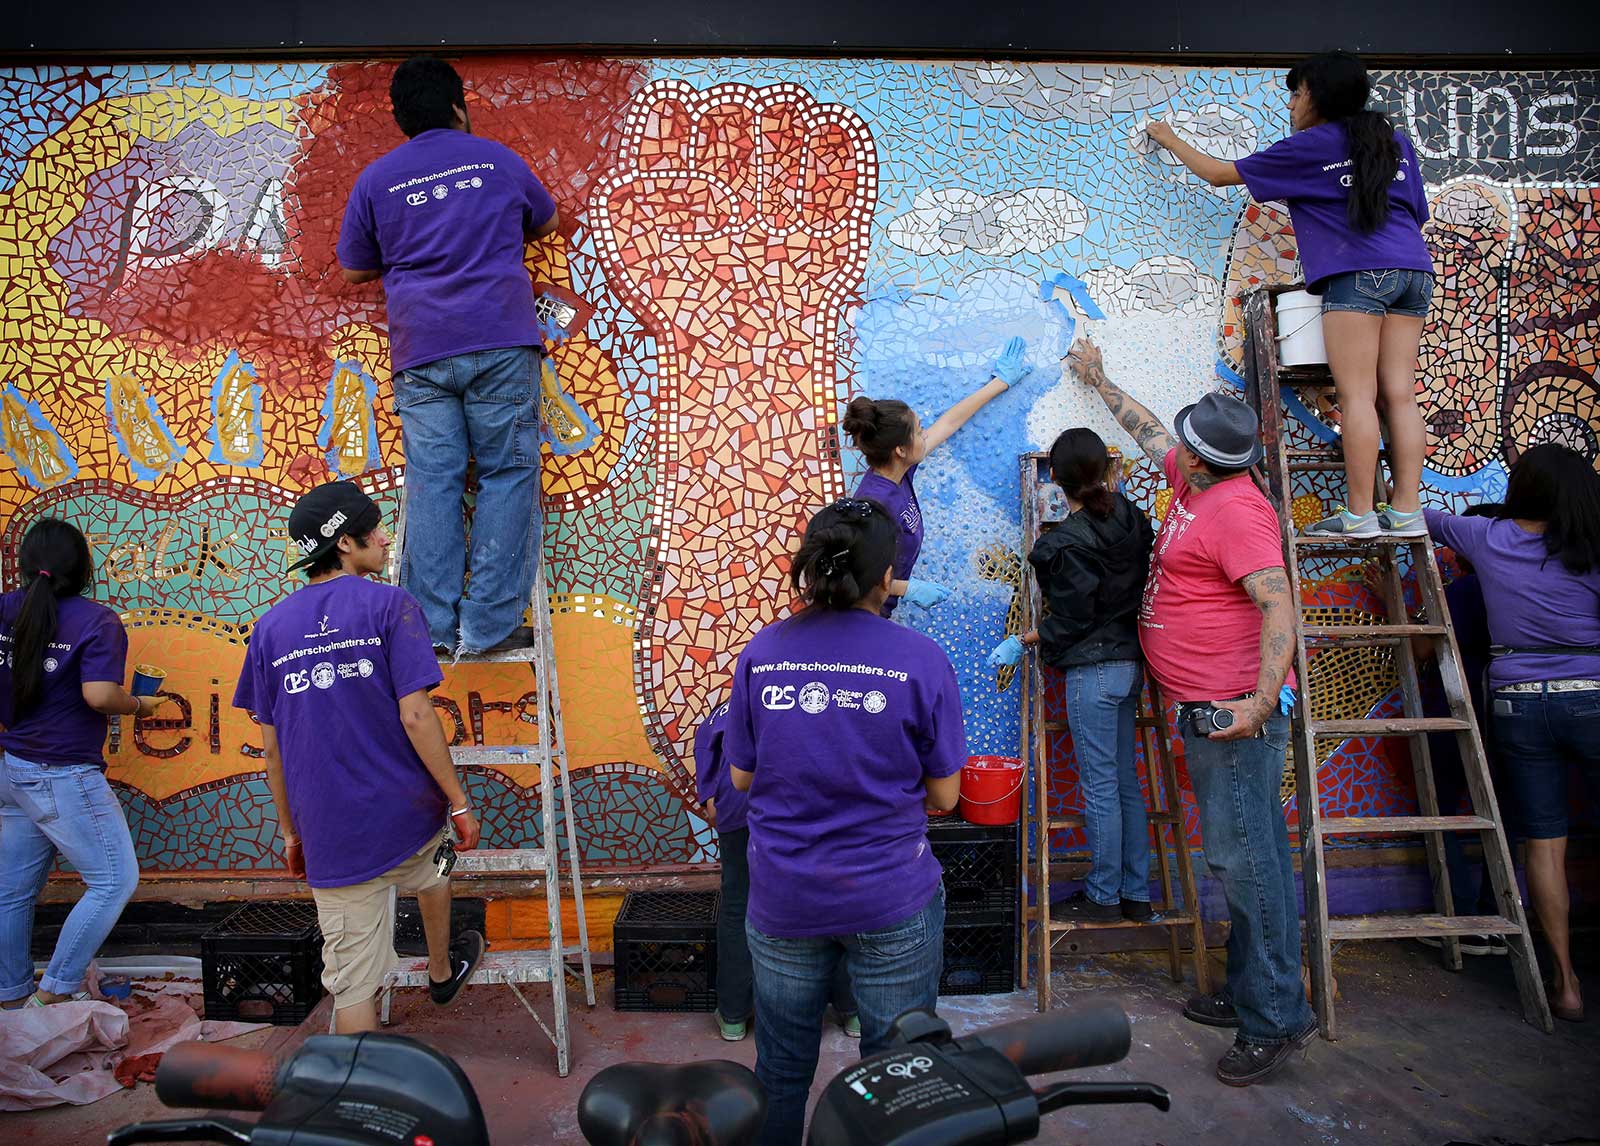 people in purple shirts painting a public mural